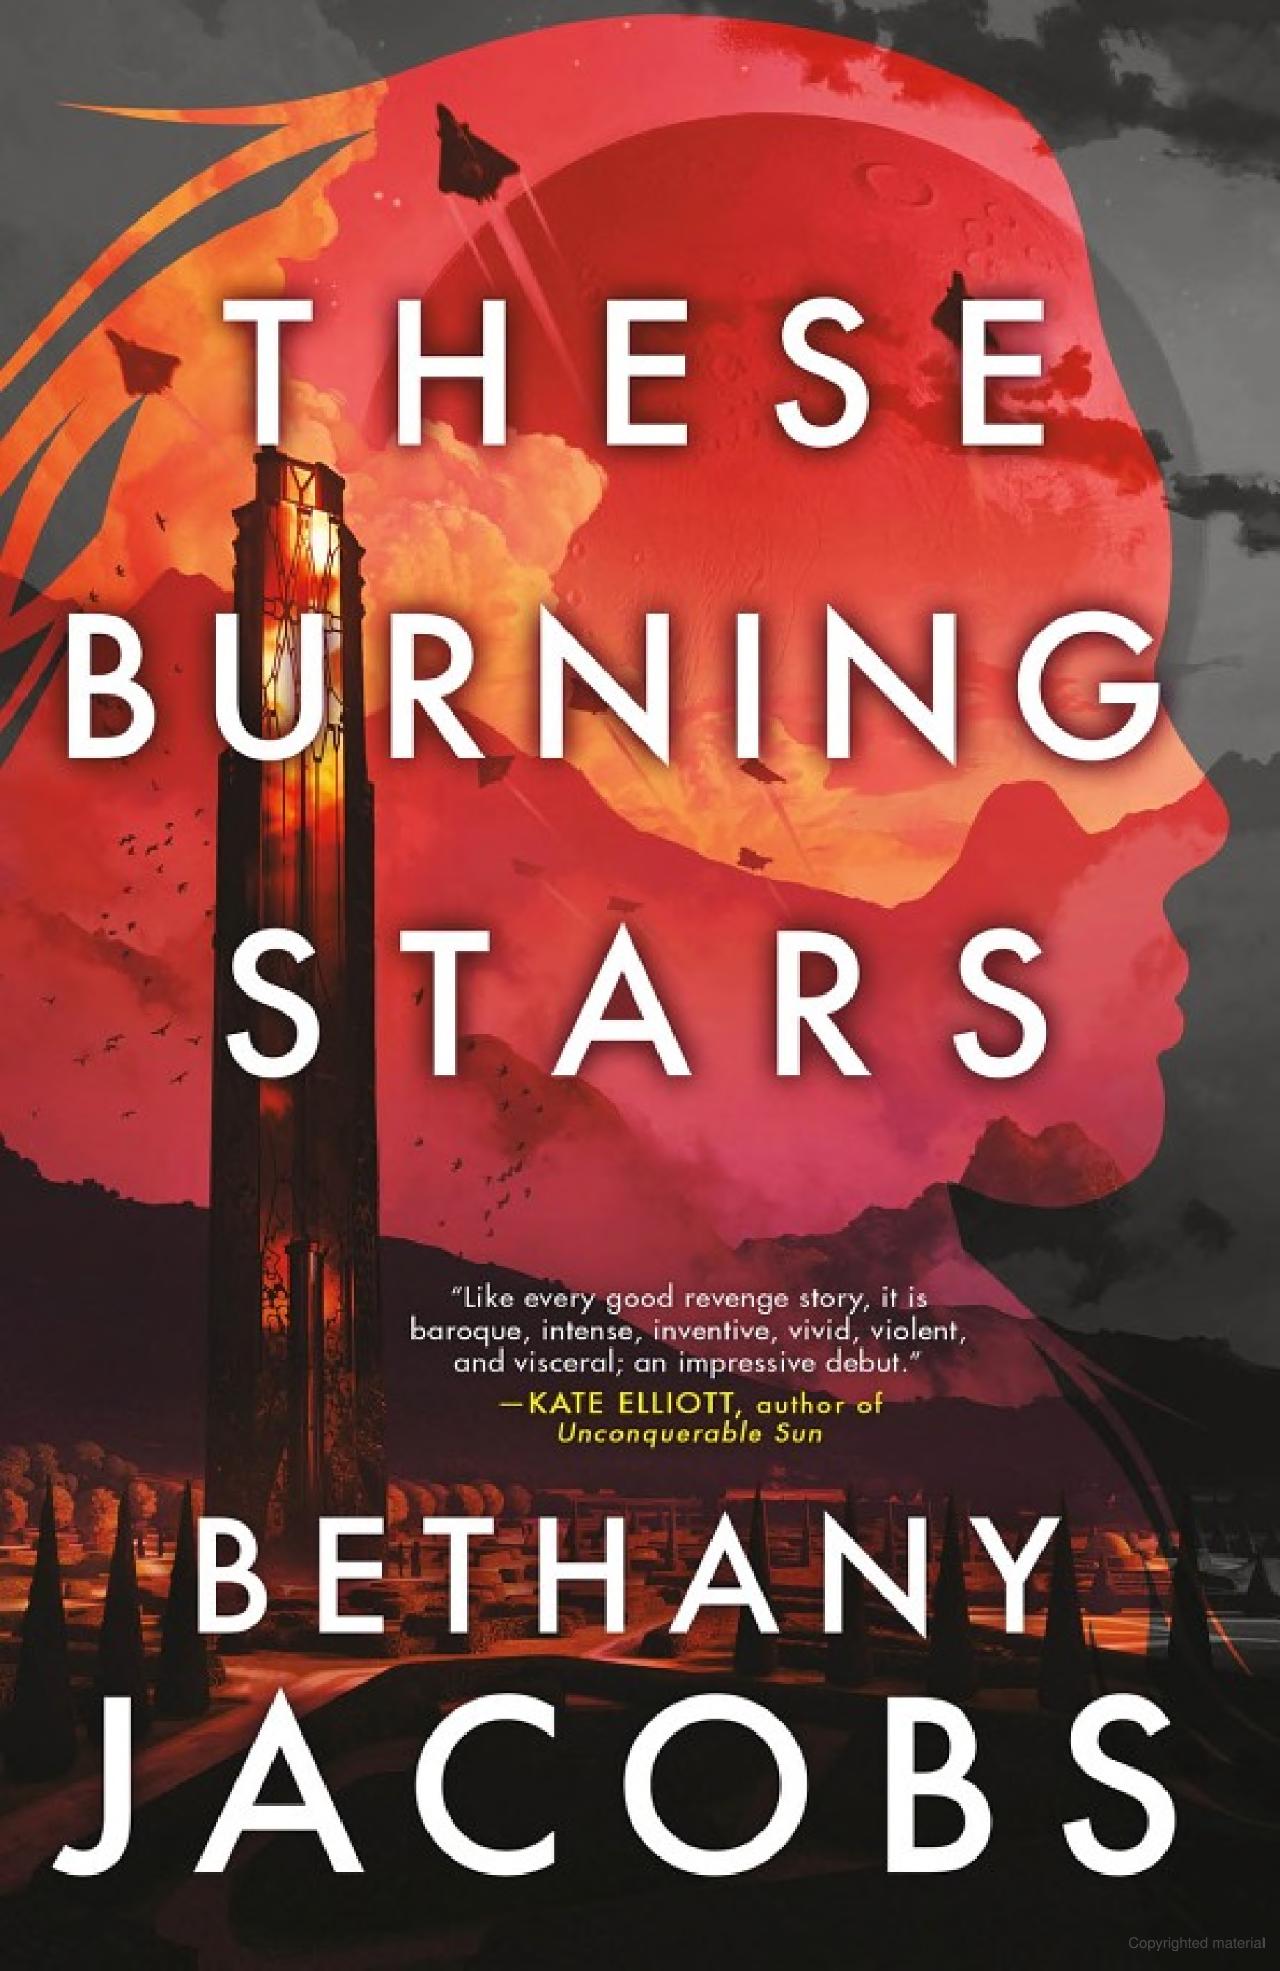 These Burning Stars -Bethany Jacobs - The Society for Unusual Books